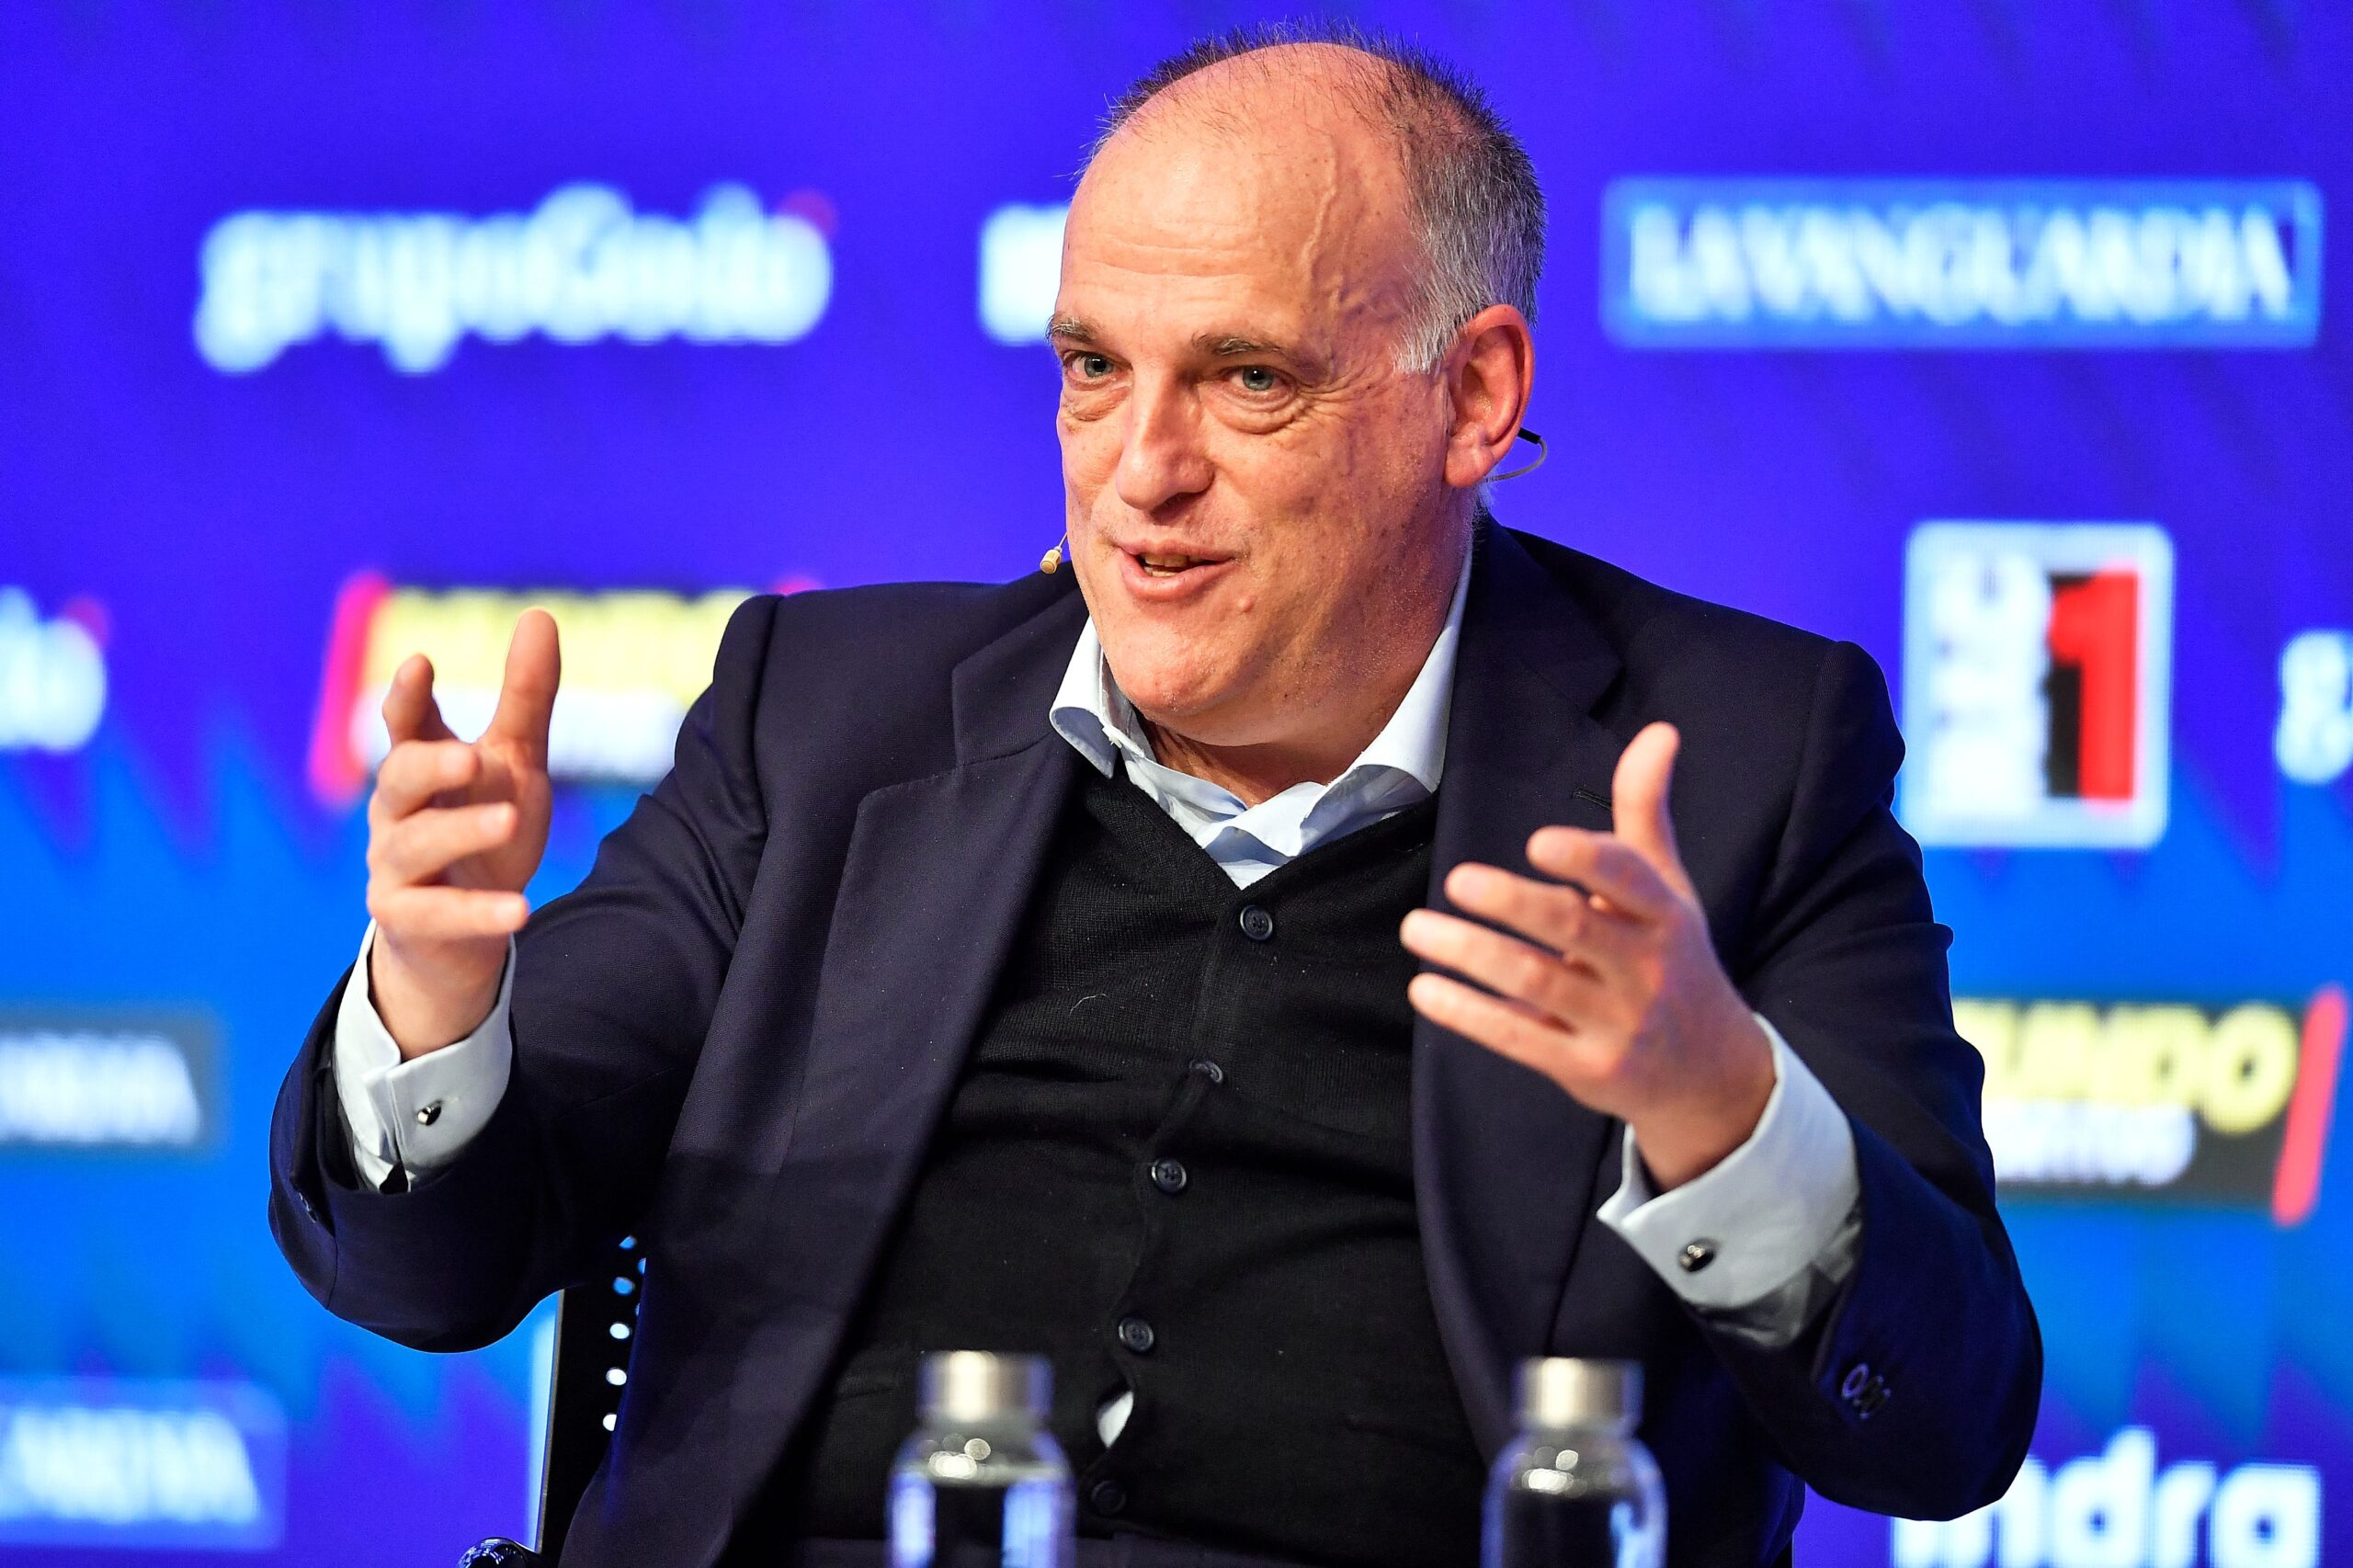 The president of the Spanish football league 'La Liga', Javier Tebas, speaks as he takes part in the forum Defense of the European Football Ecosystem, organized by La Vanguardia journal, on March 16, 2023 in Barcelona.